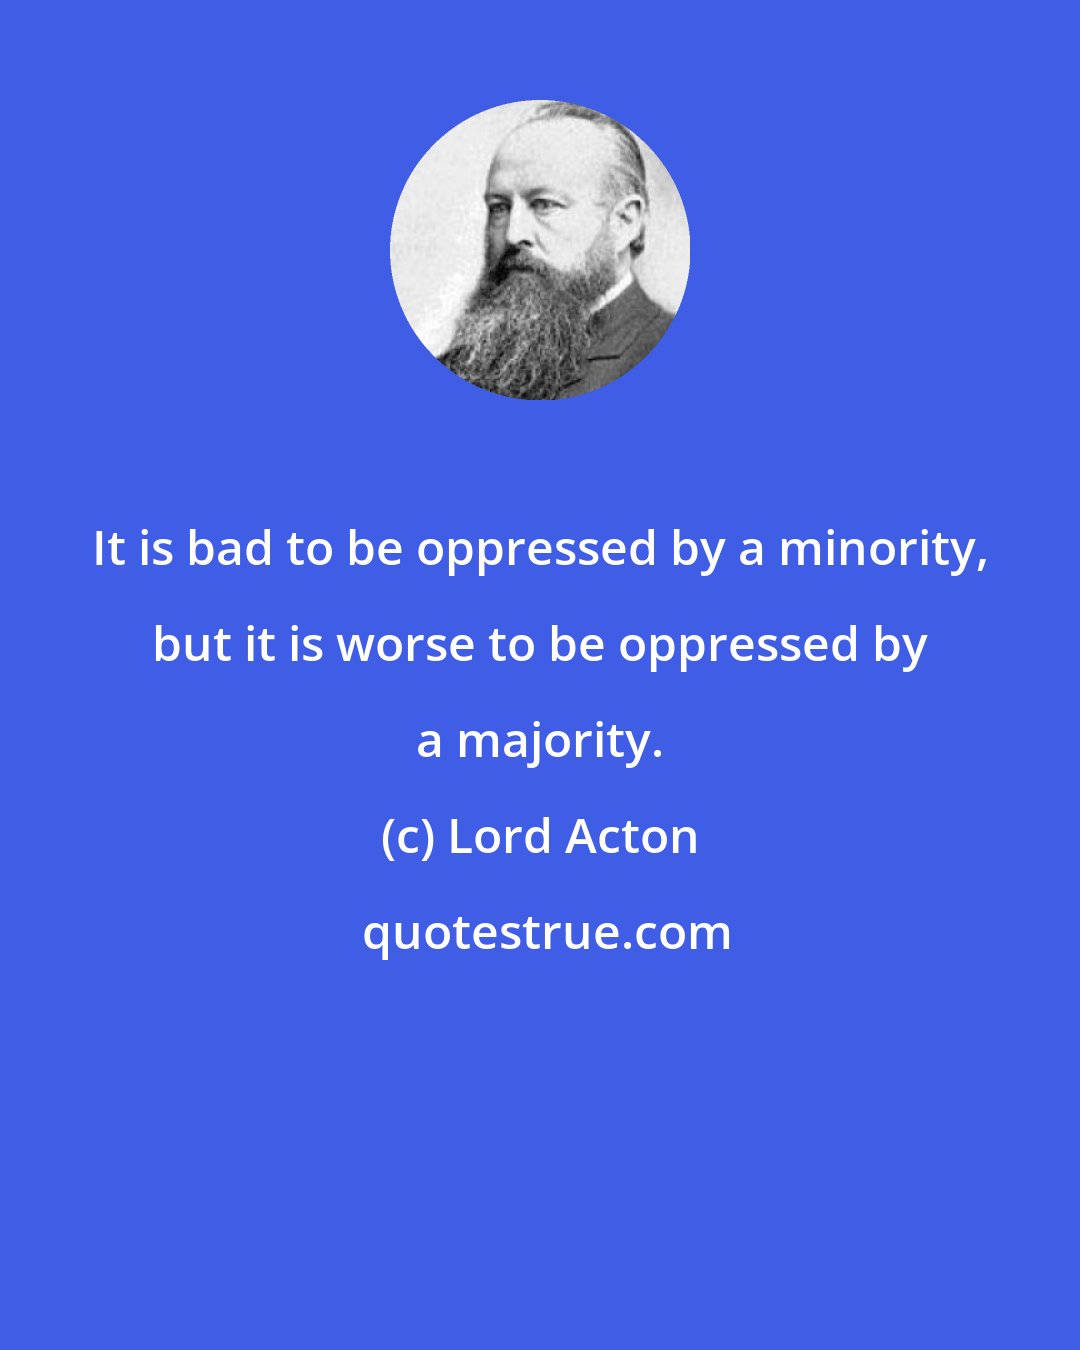 Lord Acton: It is bad to be oppressed by a minority, but it is worse to be oppressed by a majority.